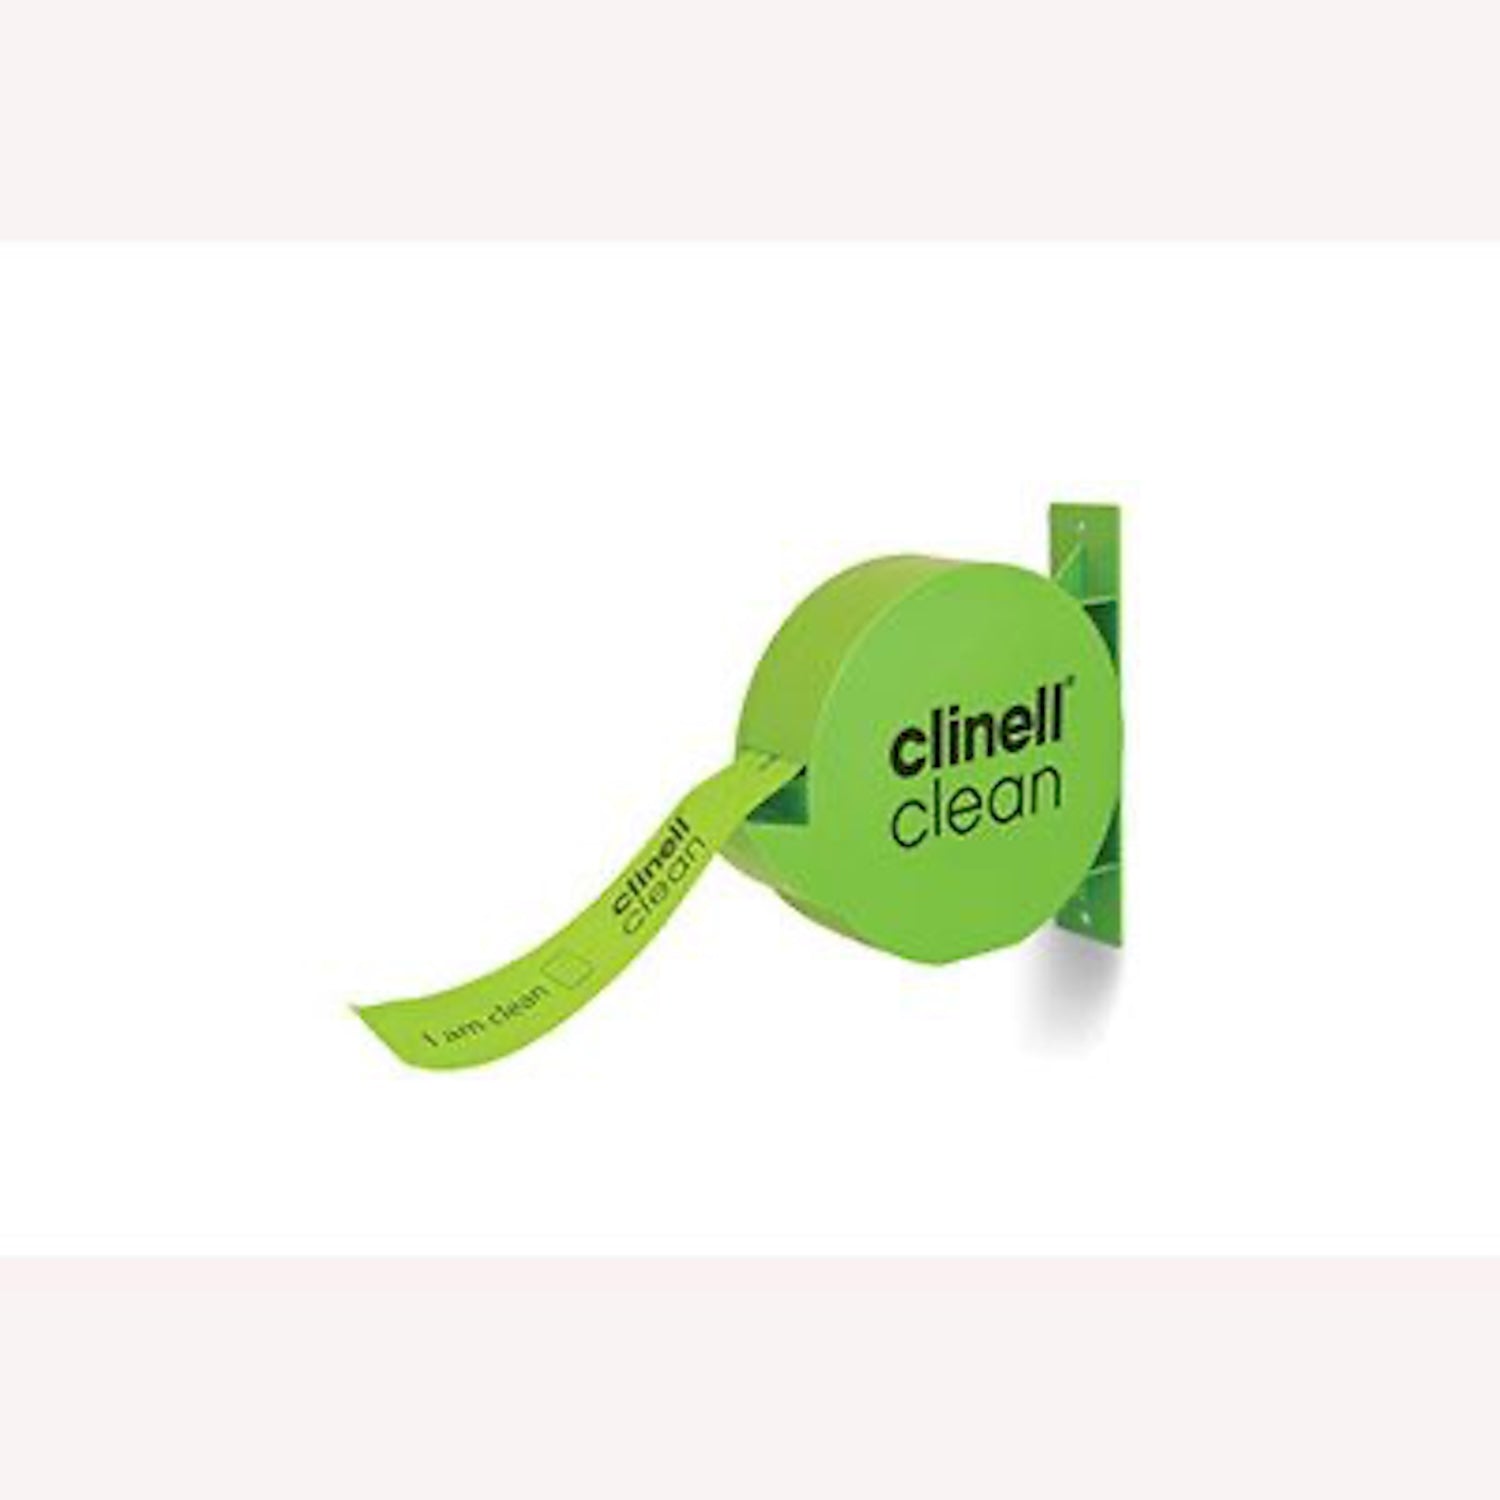 Clinell Clean Indicator Tape Dispenser